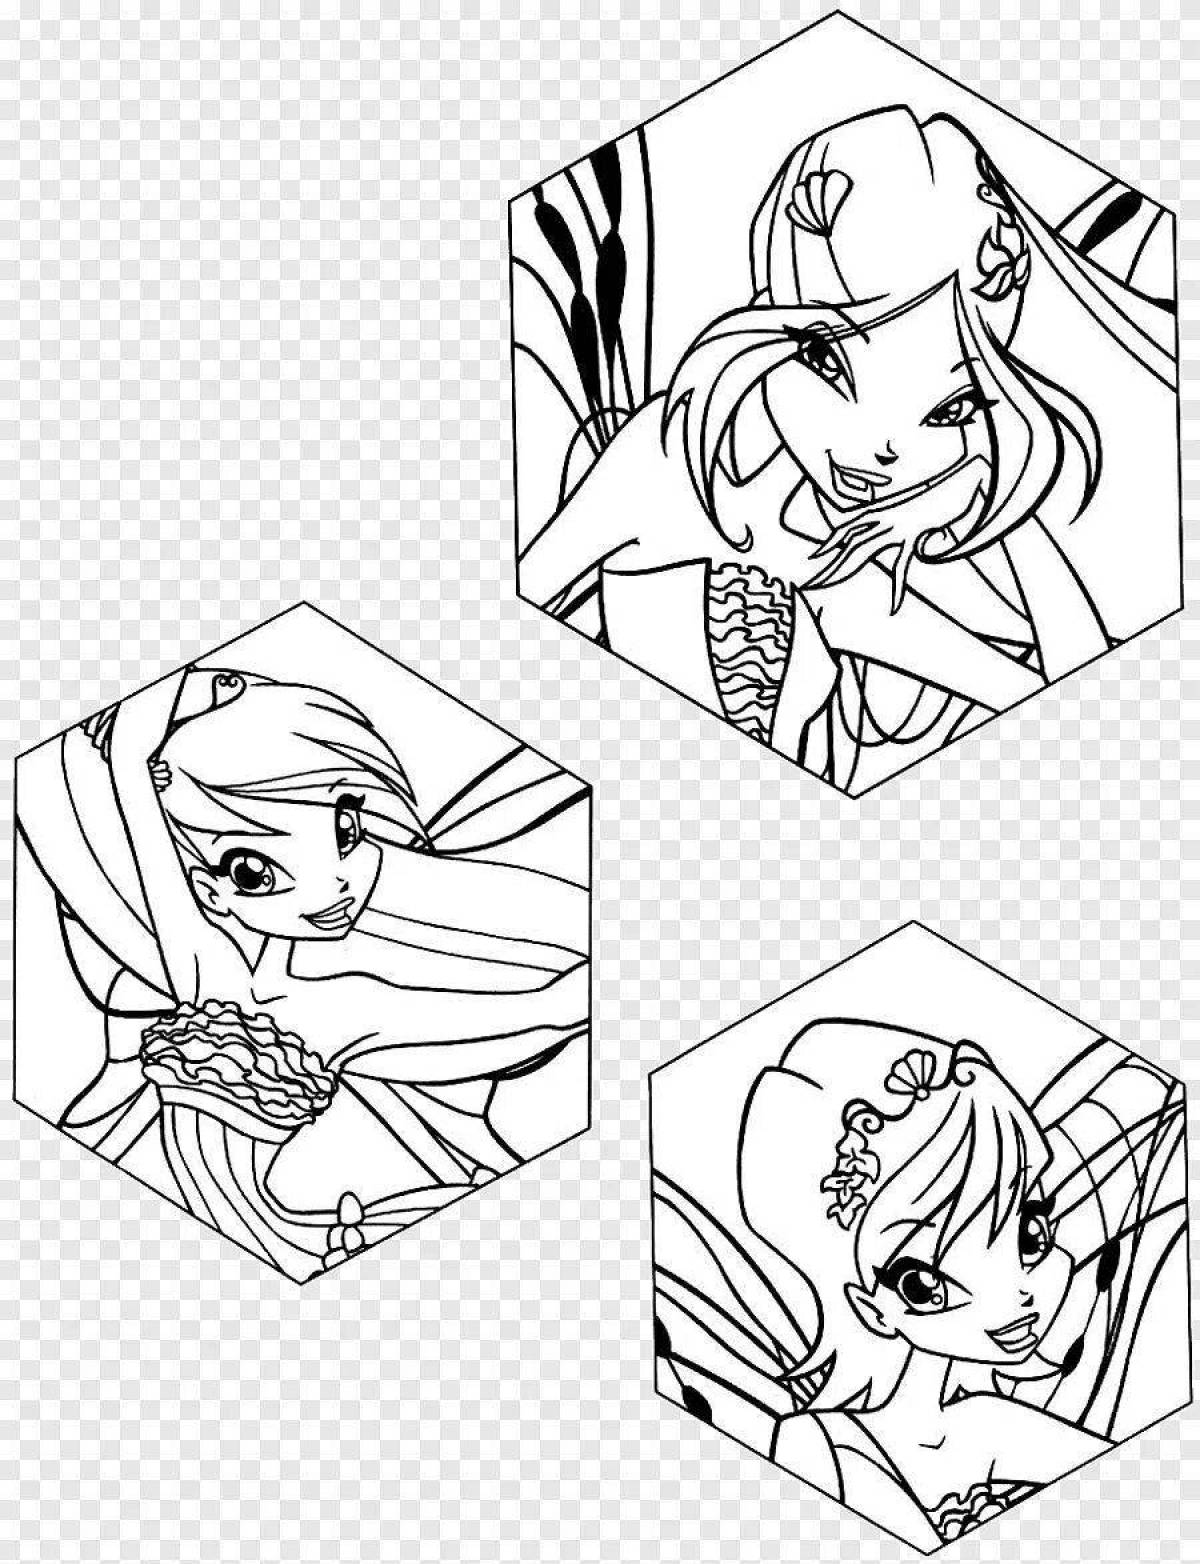 Playful winx comics coloring page